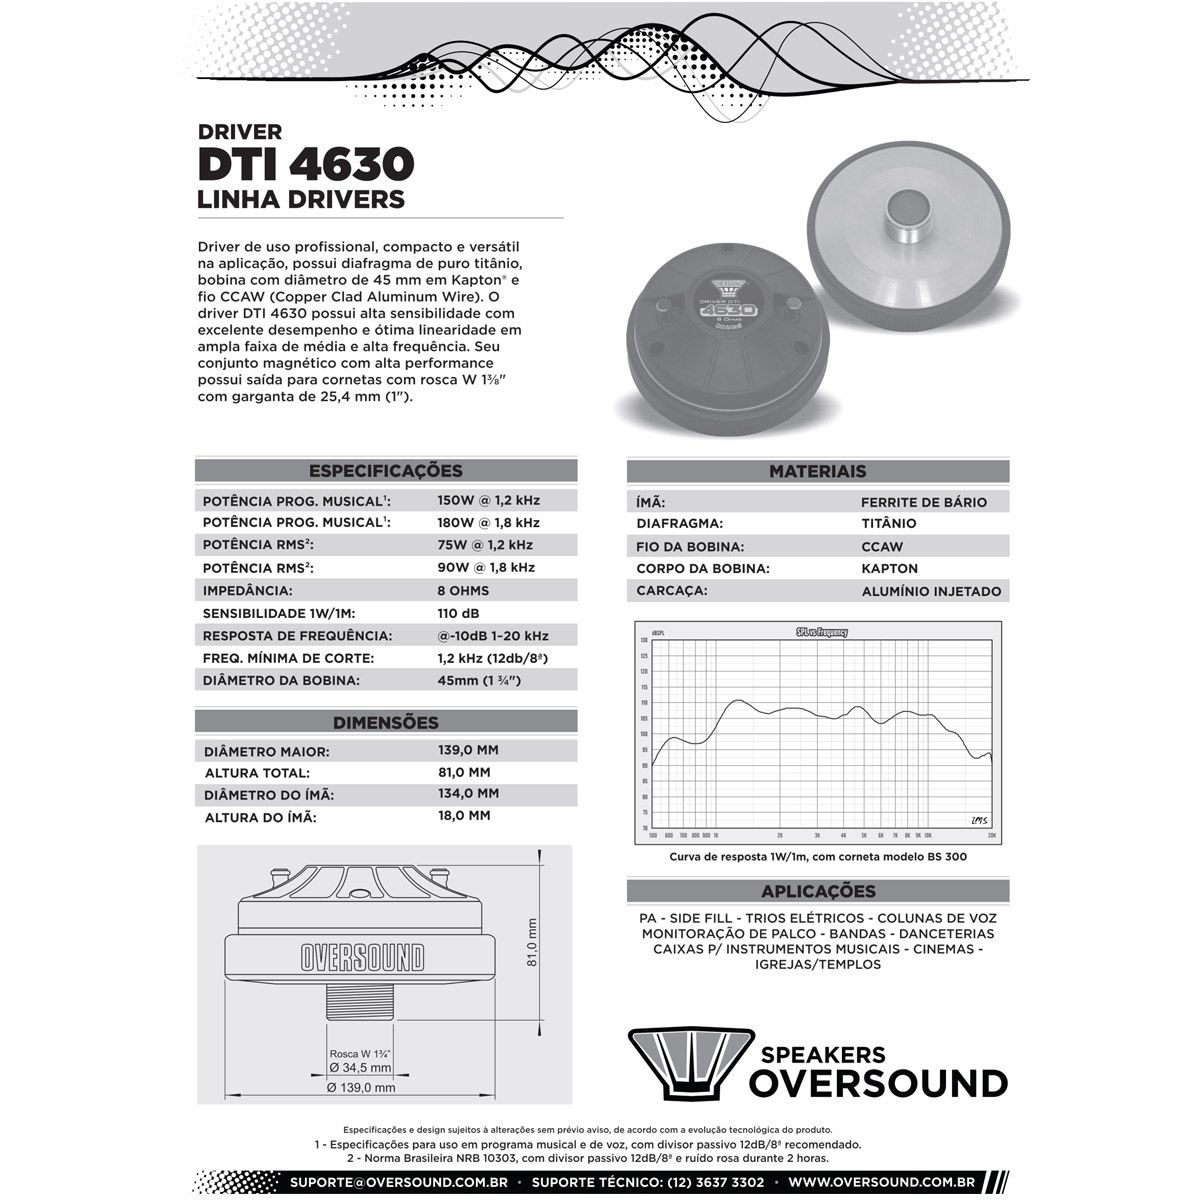 Driver DTI 4630 - Oversound